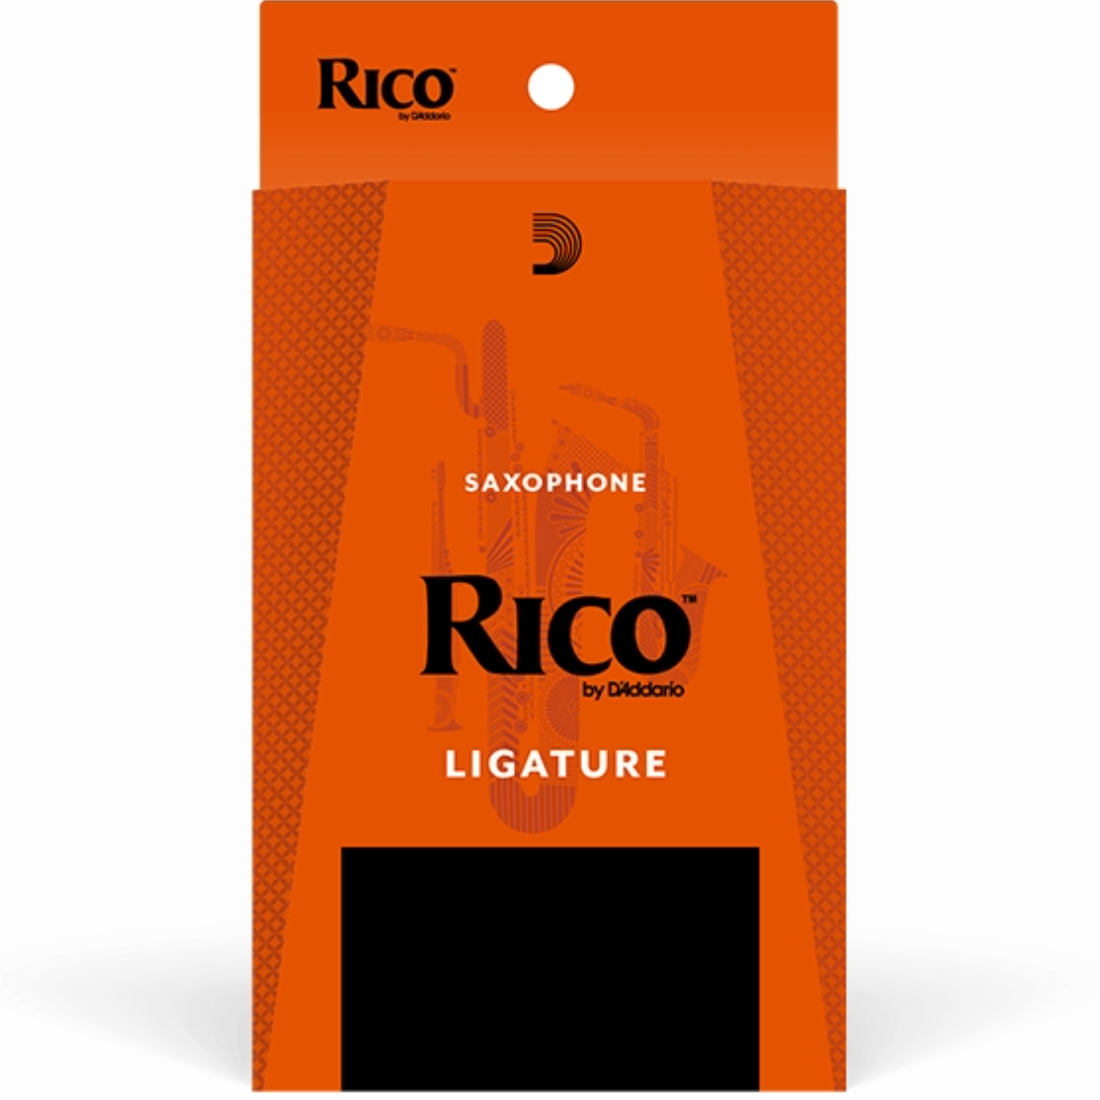 Red box of a RICO ligature and cap set